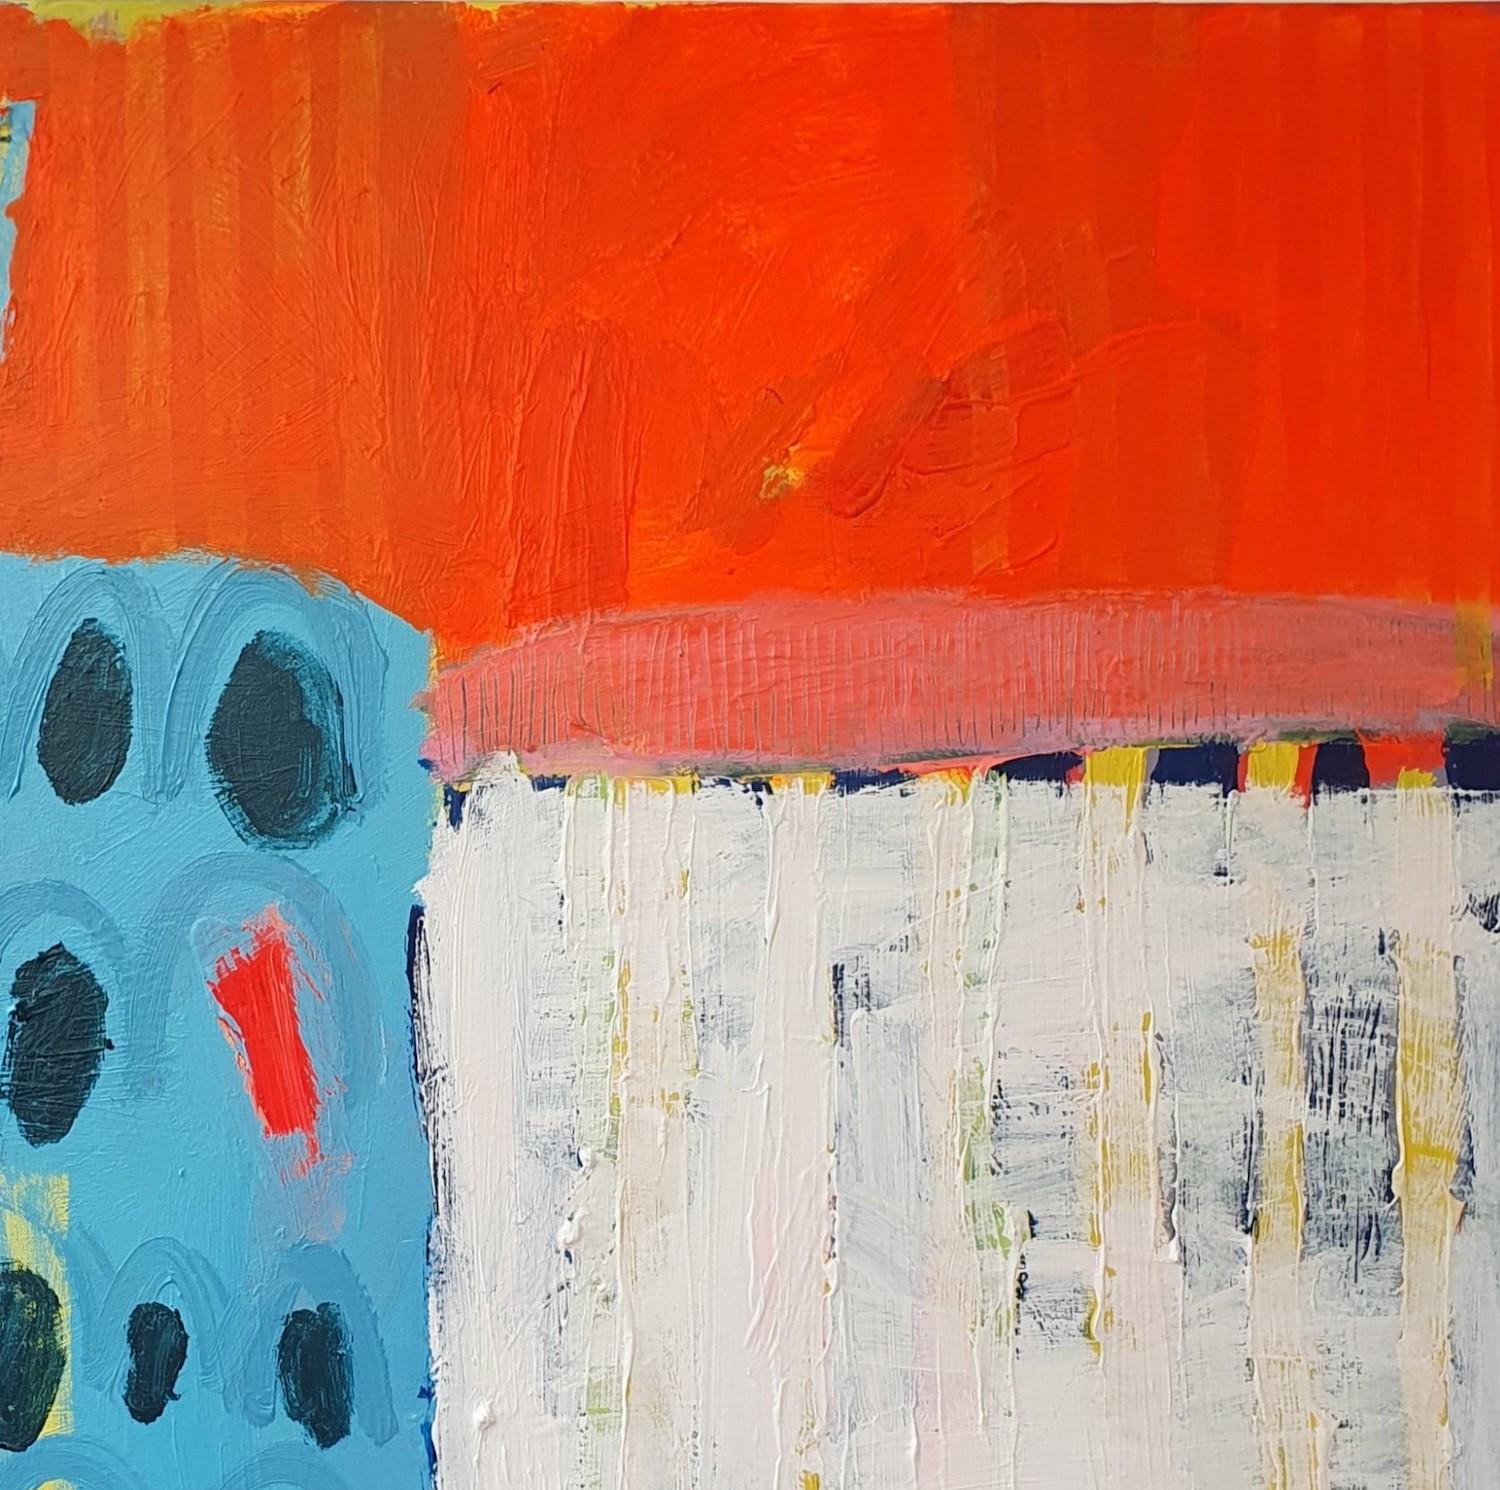 #577 by Jessie Woodward [2022]
Signed by the artist
Acrylic on canvas
Size: H:80 cm x W:100 x D3cm
Please note that insitu images are purely an indication of how a piece may look
#577 is an original abstract painting by artist Jessie Woodward,